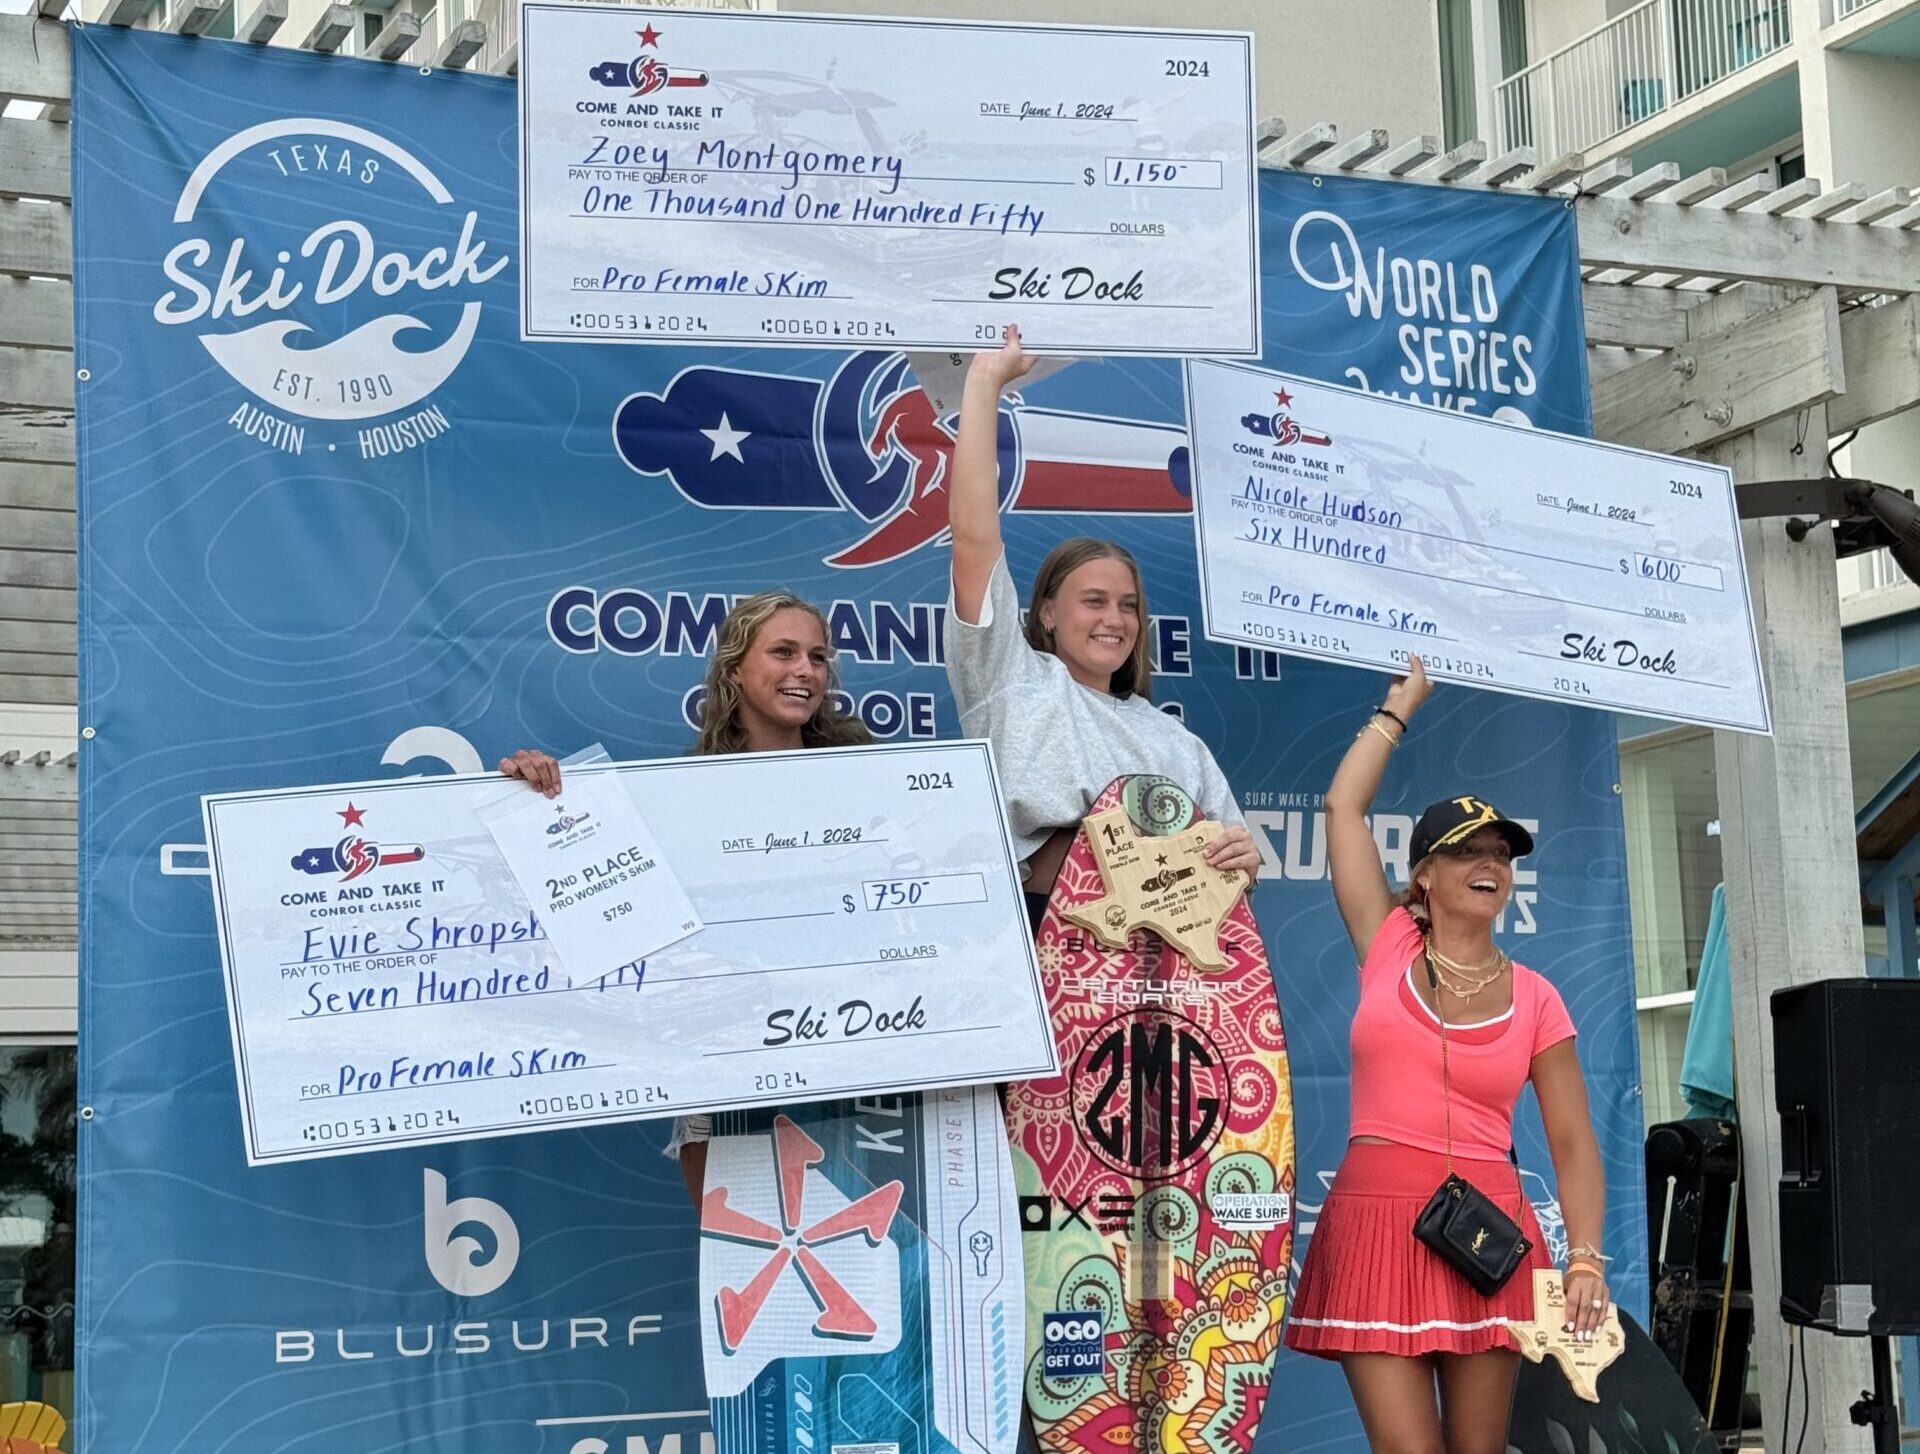 Three women pose on a winners' podium during the Conroe Classic Day 2 Finals, holding oversized prize checks and small awards, with one woman clutching a trophy. The backdrop displays logos and promotional signage from sponsors, including Centurion WSWS.